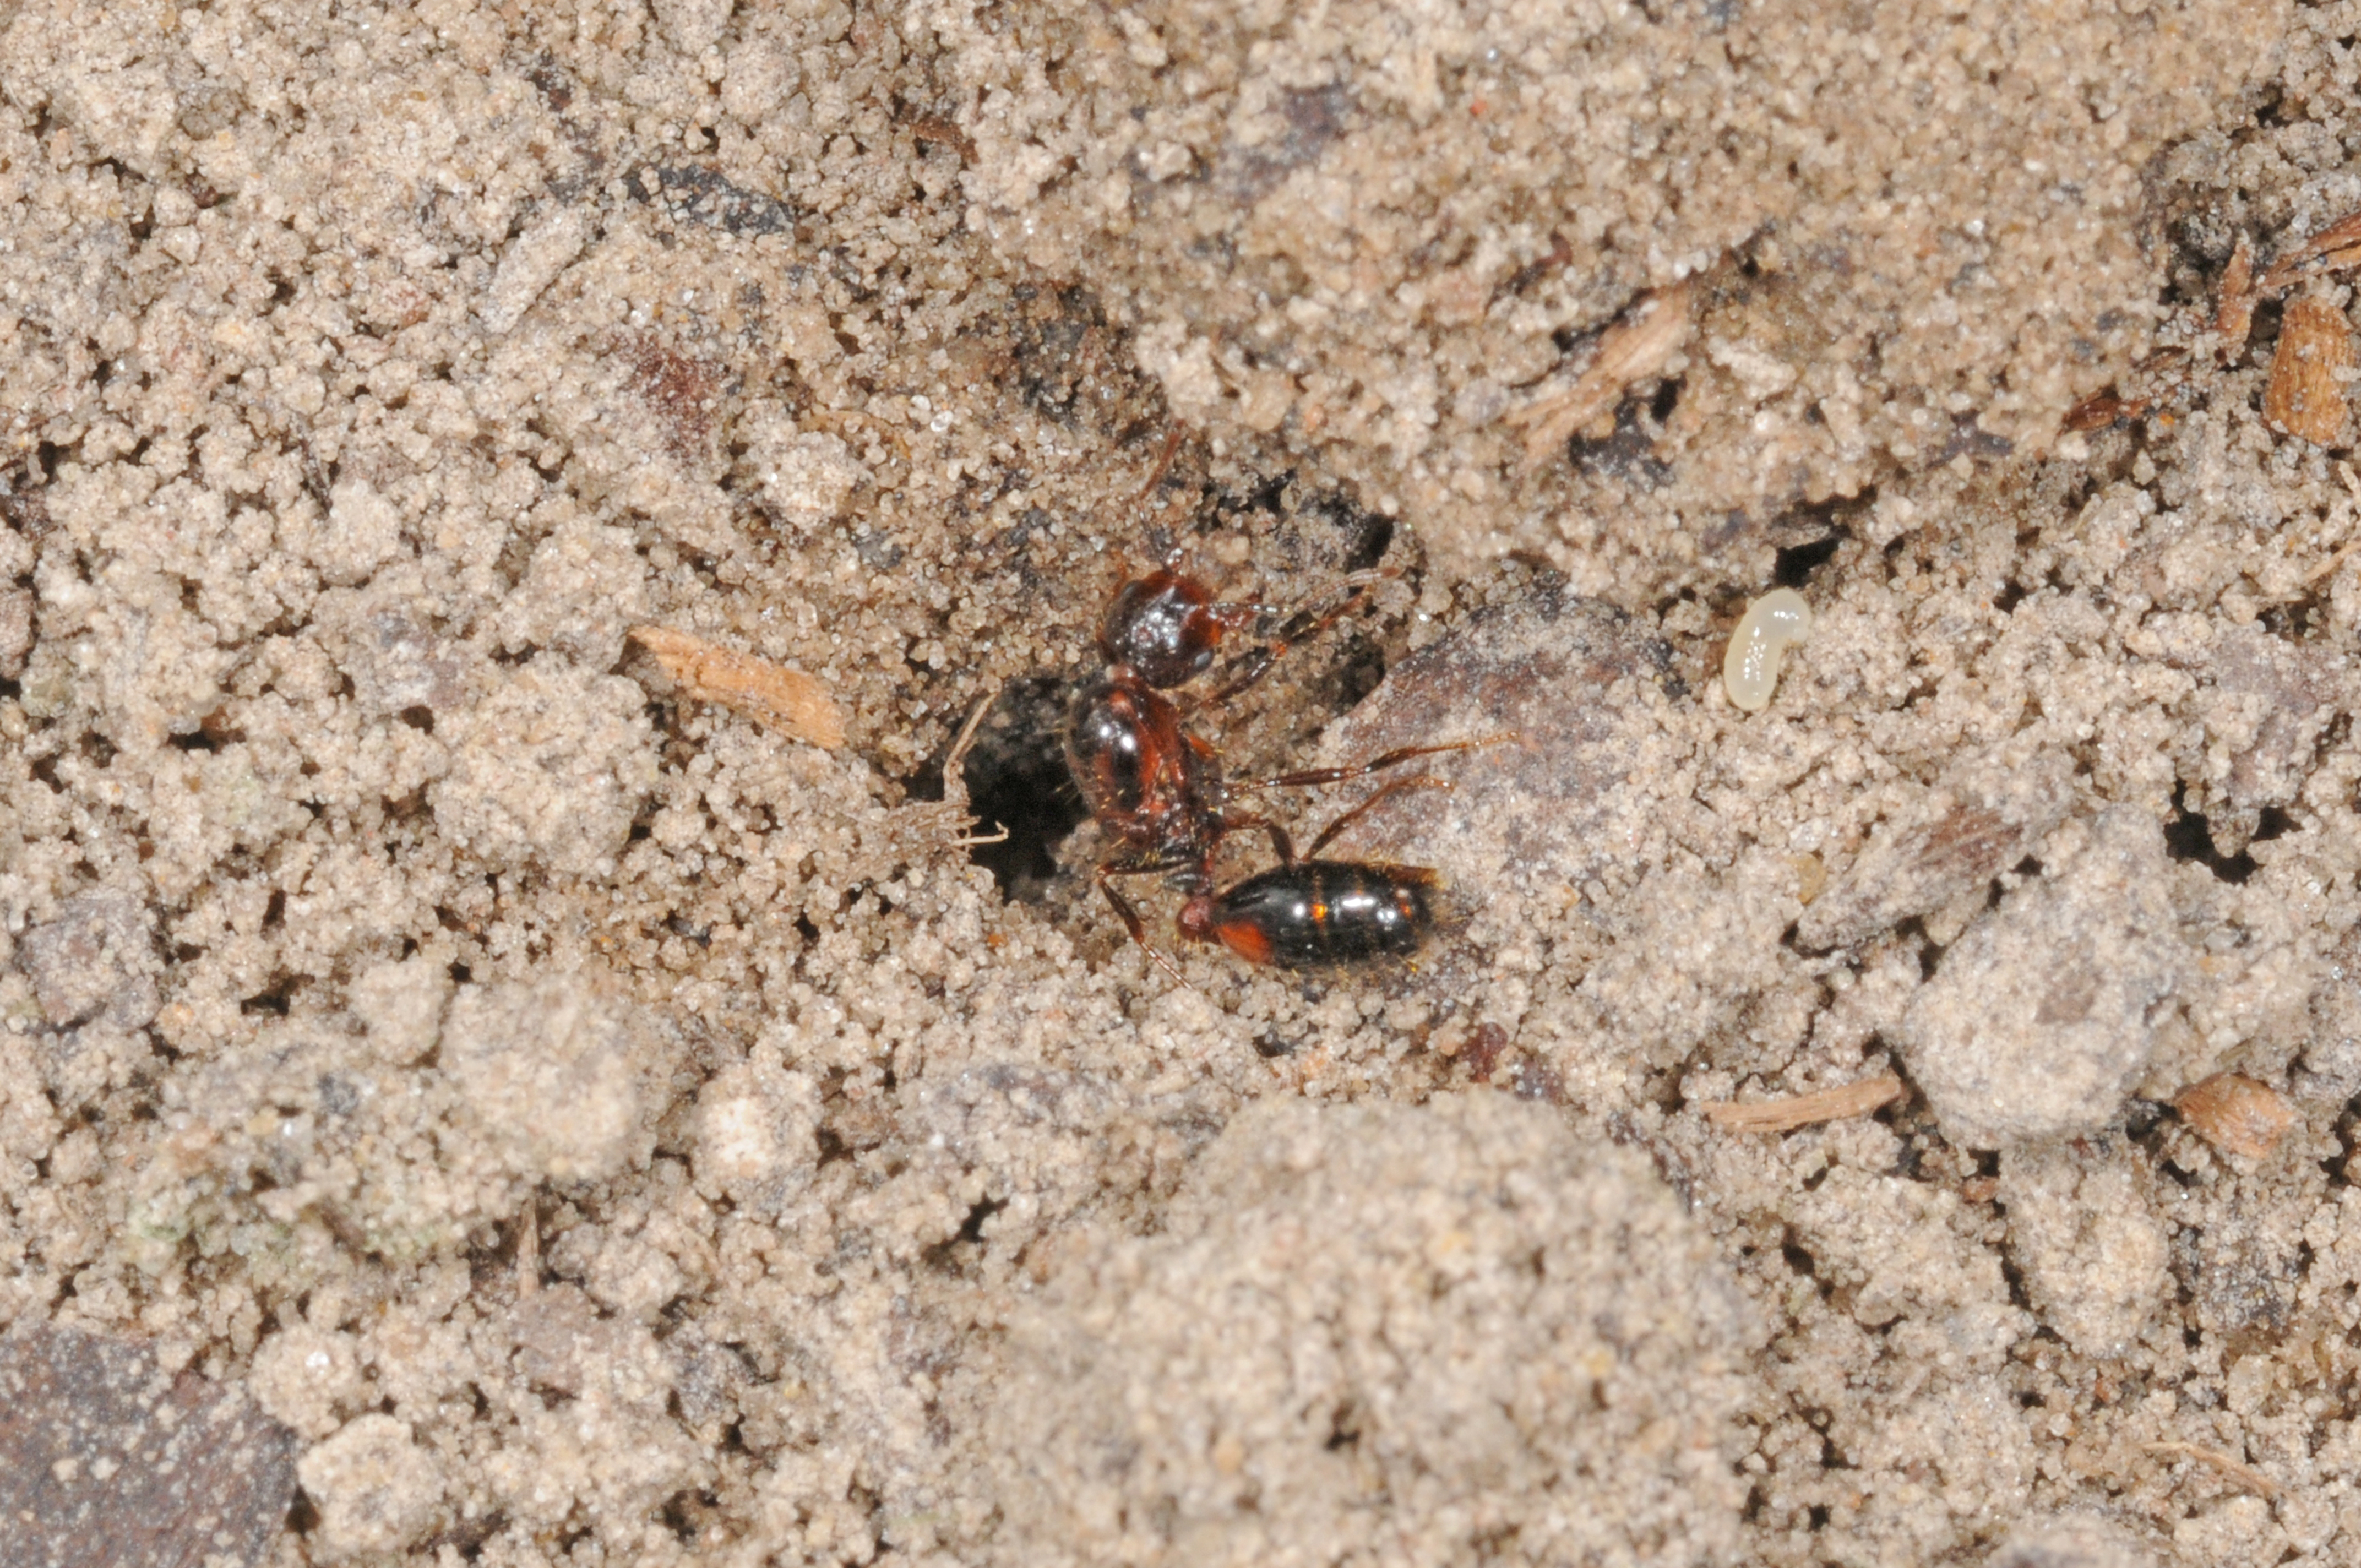 Closeup on one large ant.